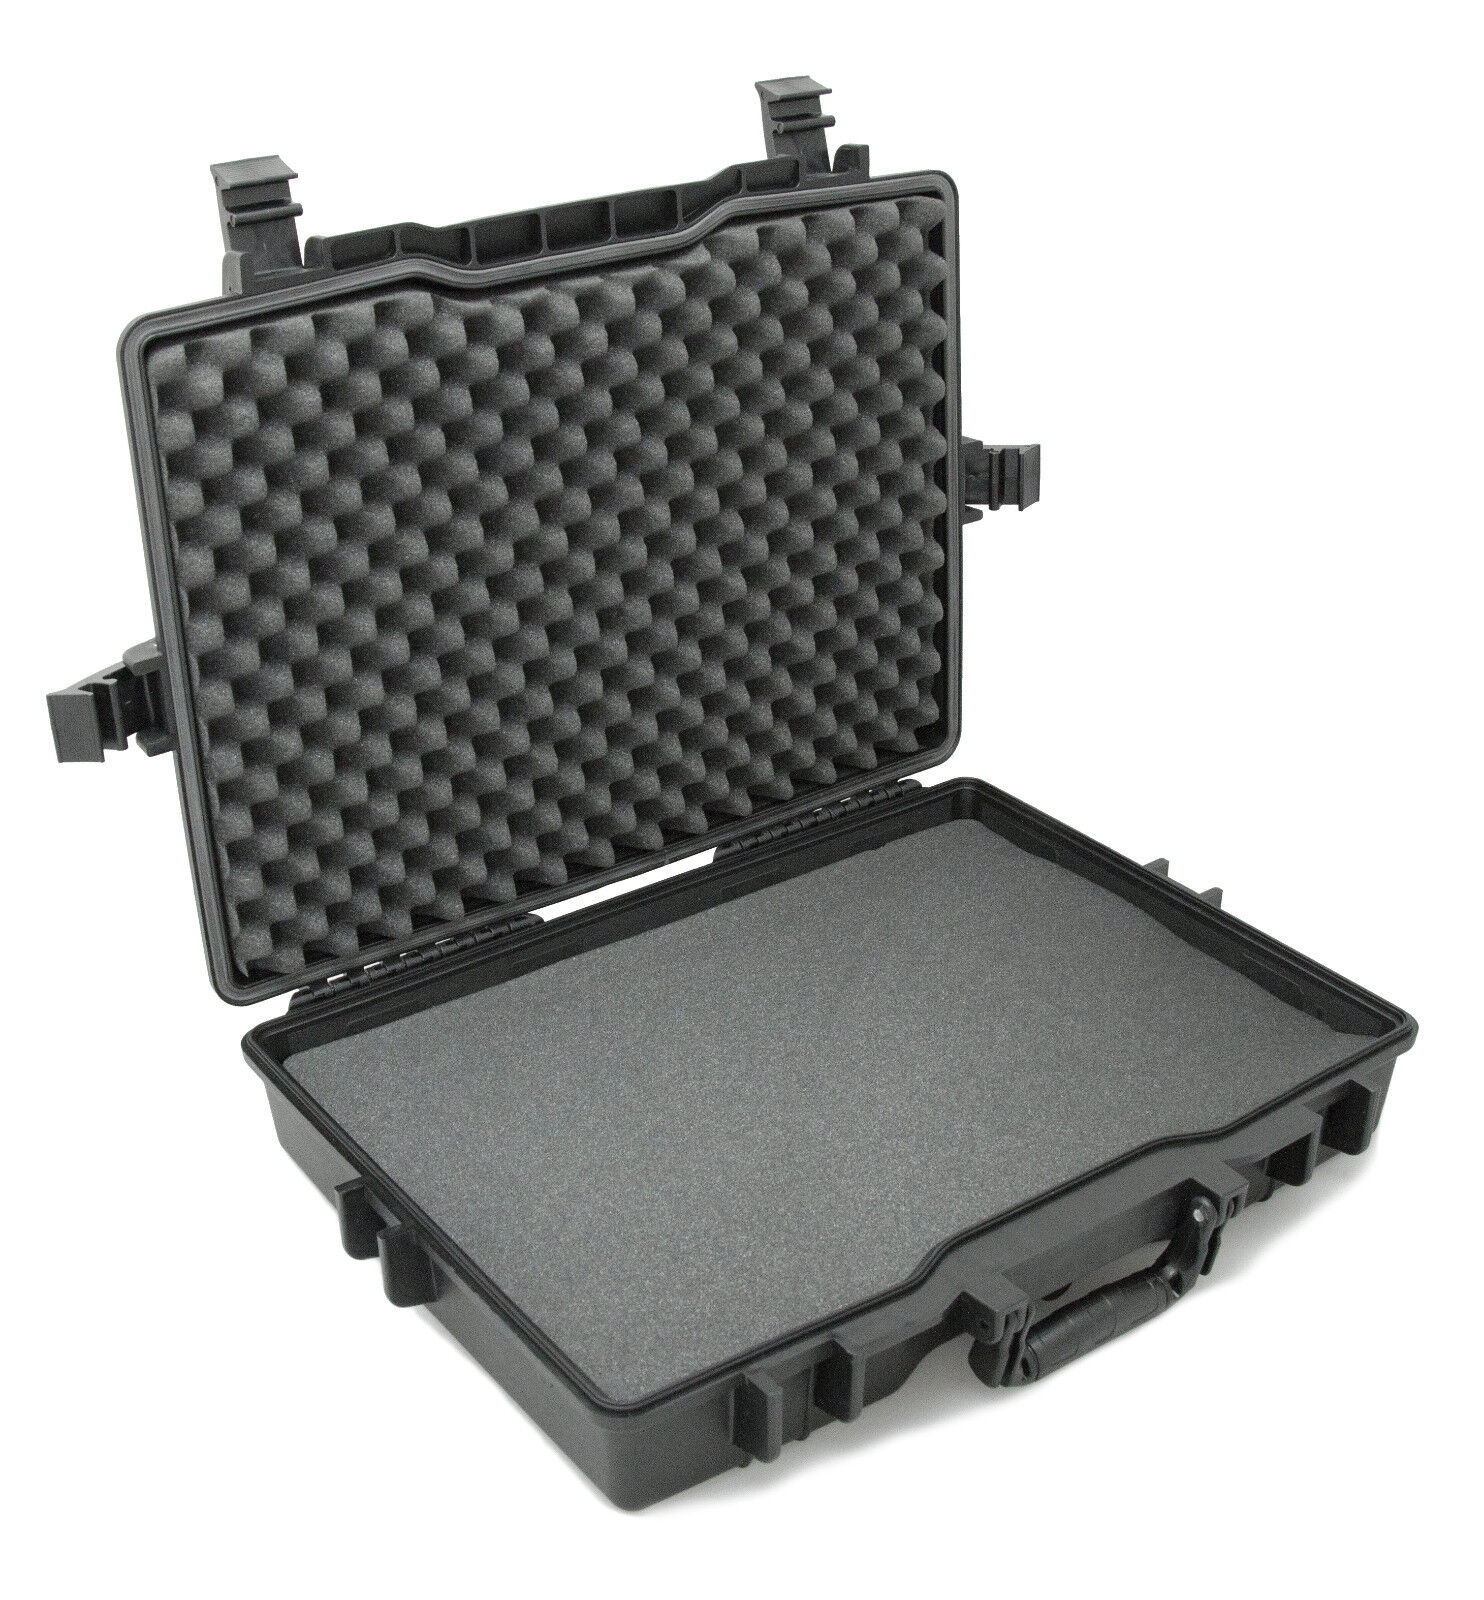 CM Waterproof Laptop Case fits Asus Gaming Laptop , Lenovo and More, Case Only